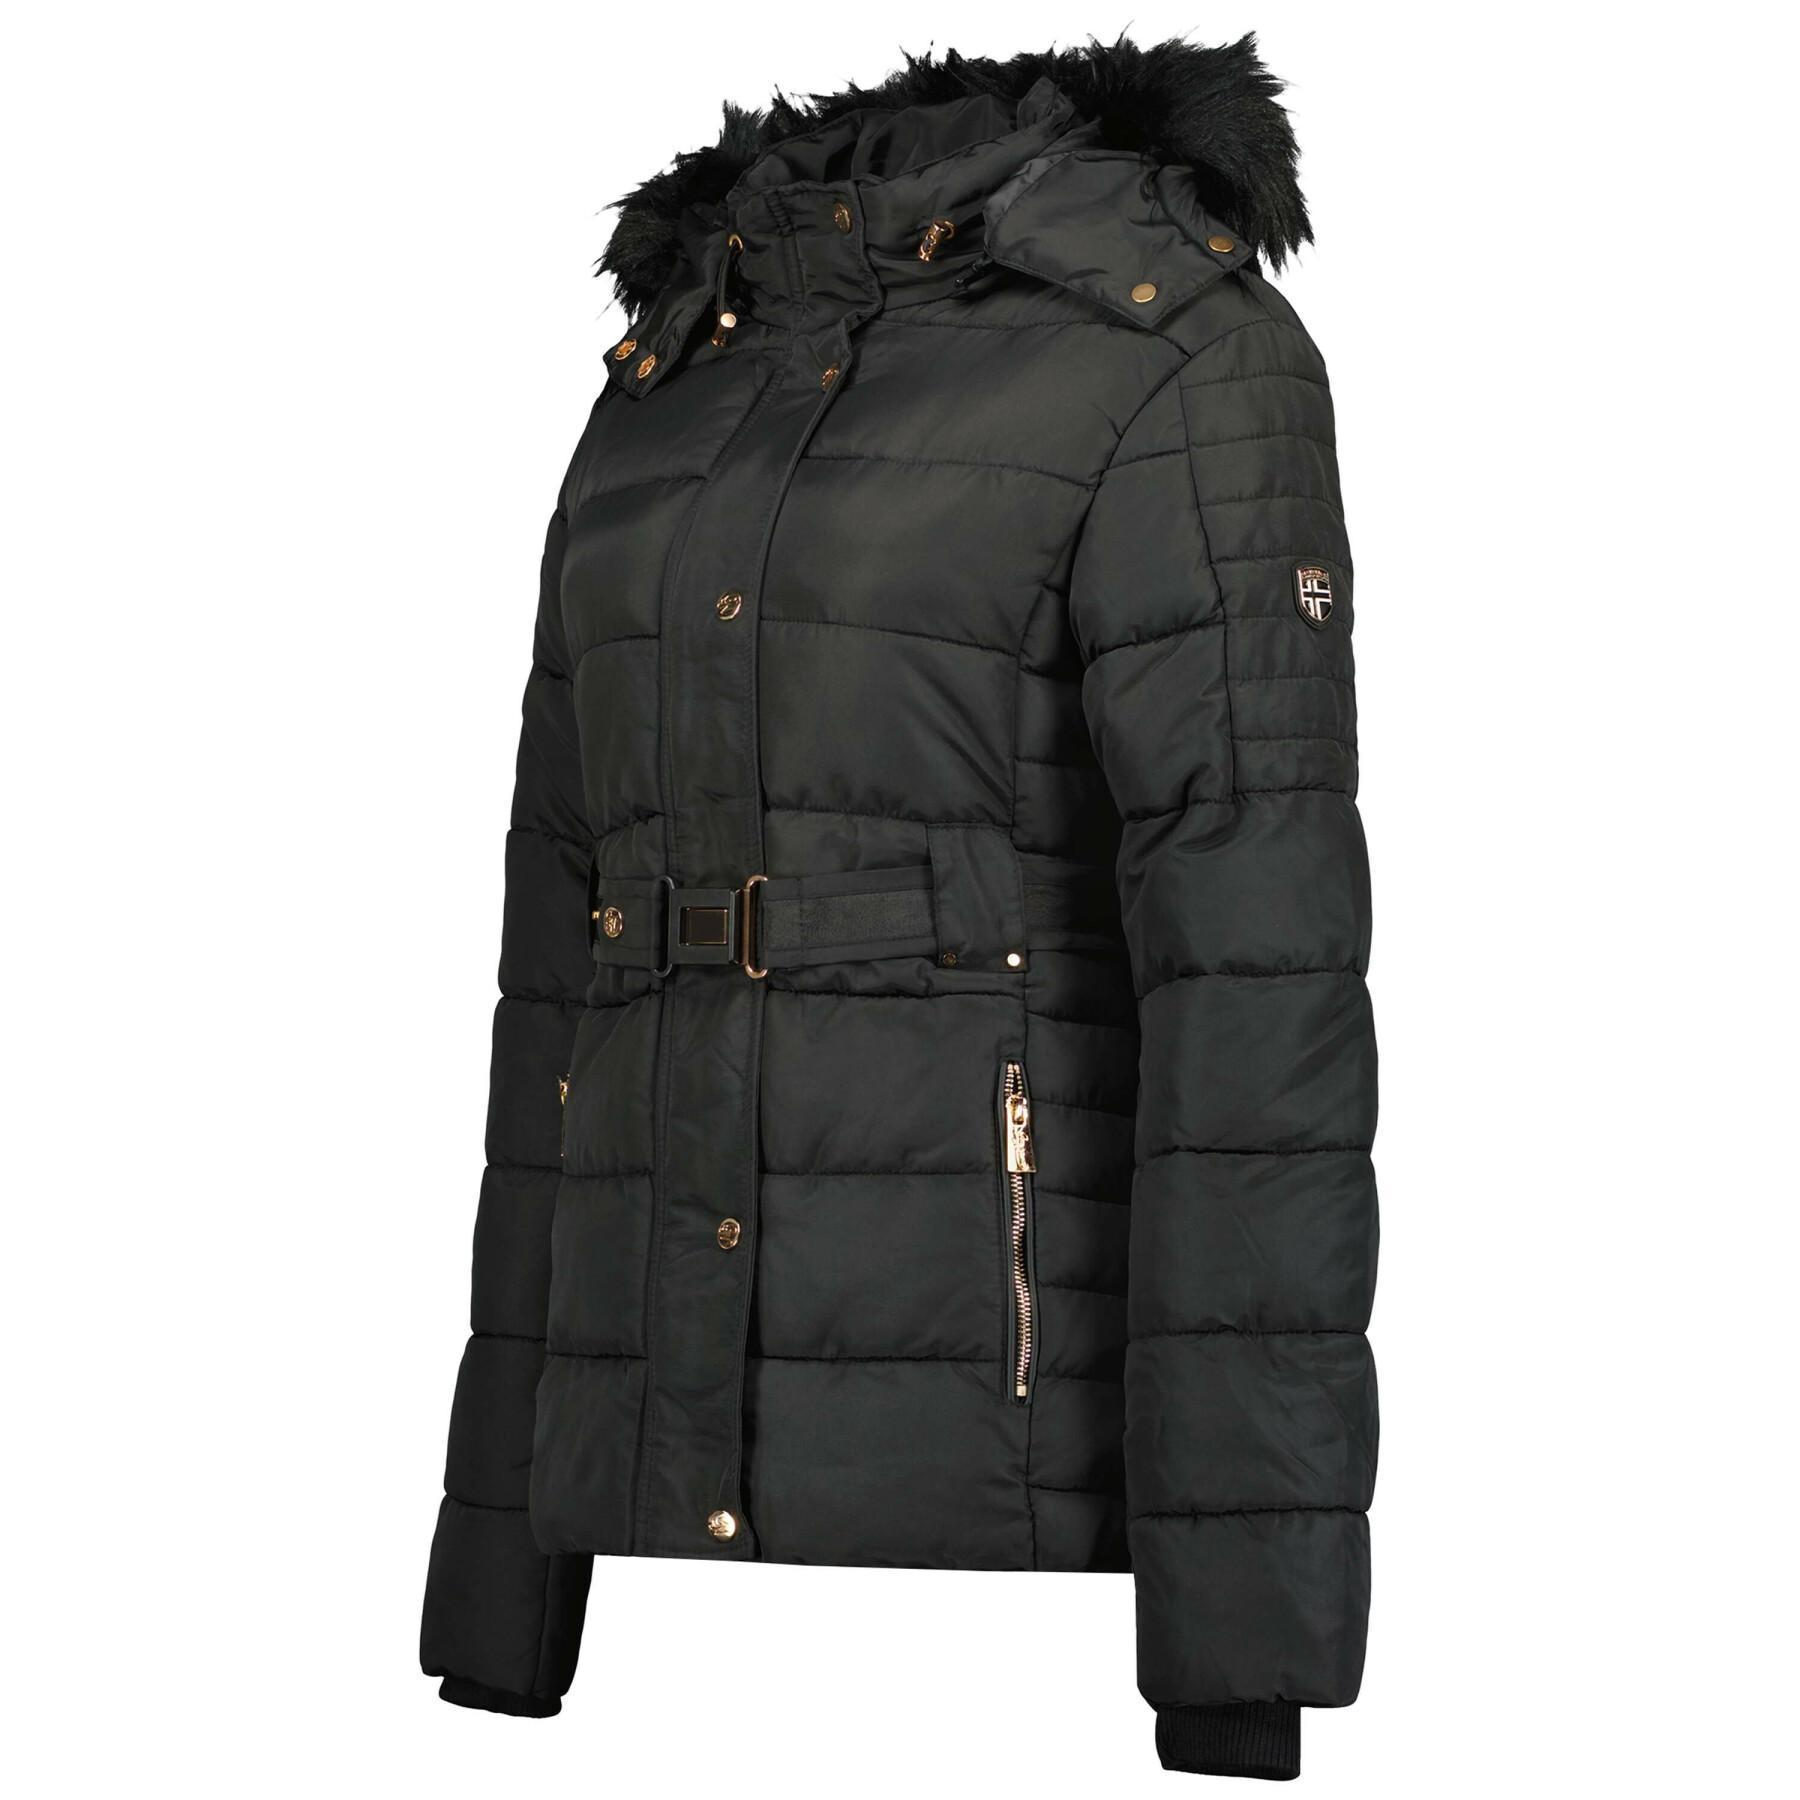 Chaqueta de plumón para mujer Geographical Norway Blood Db Eo